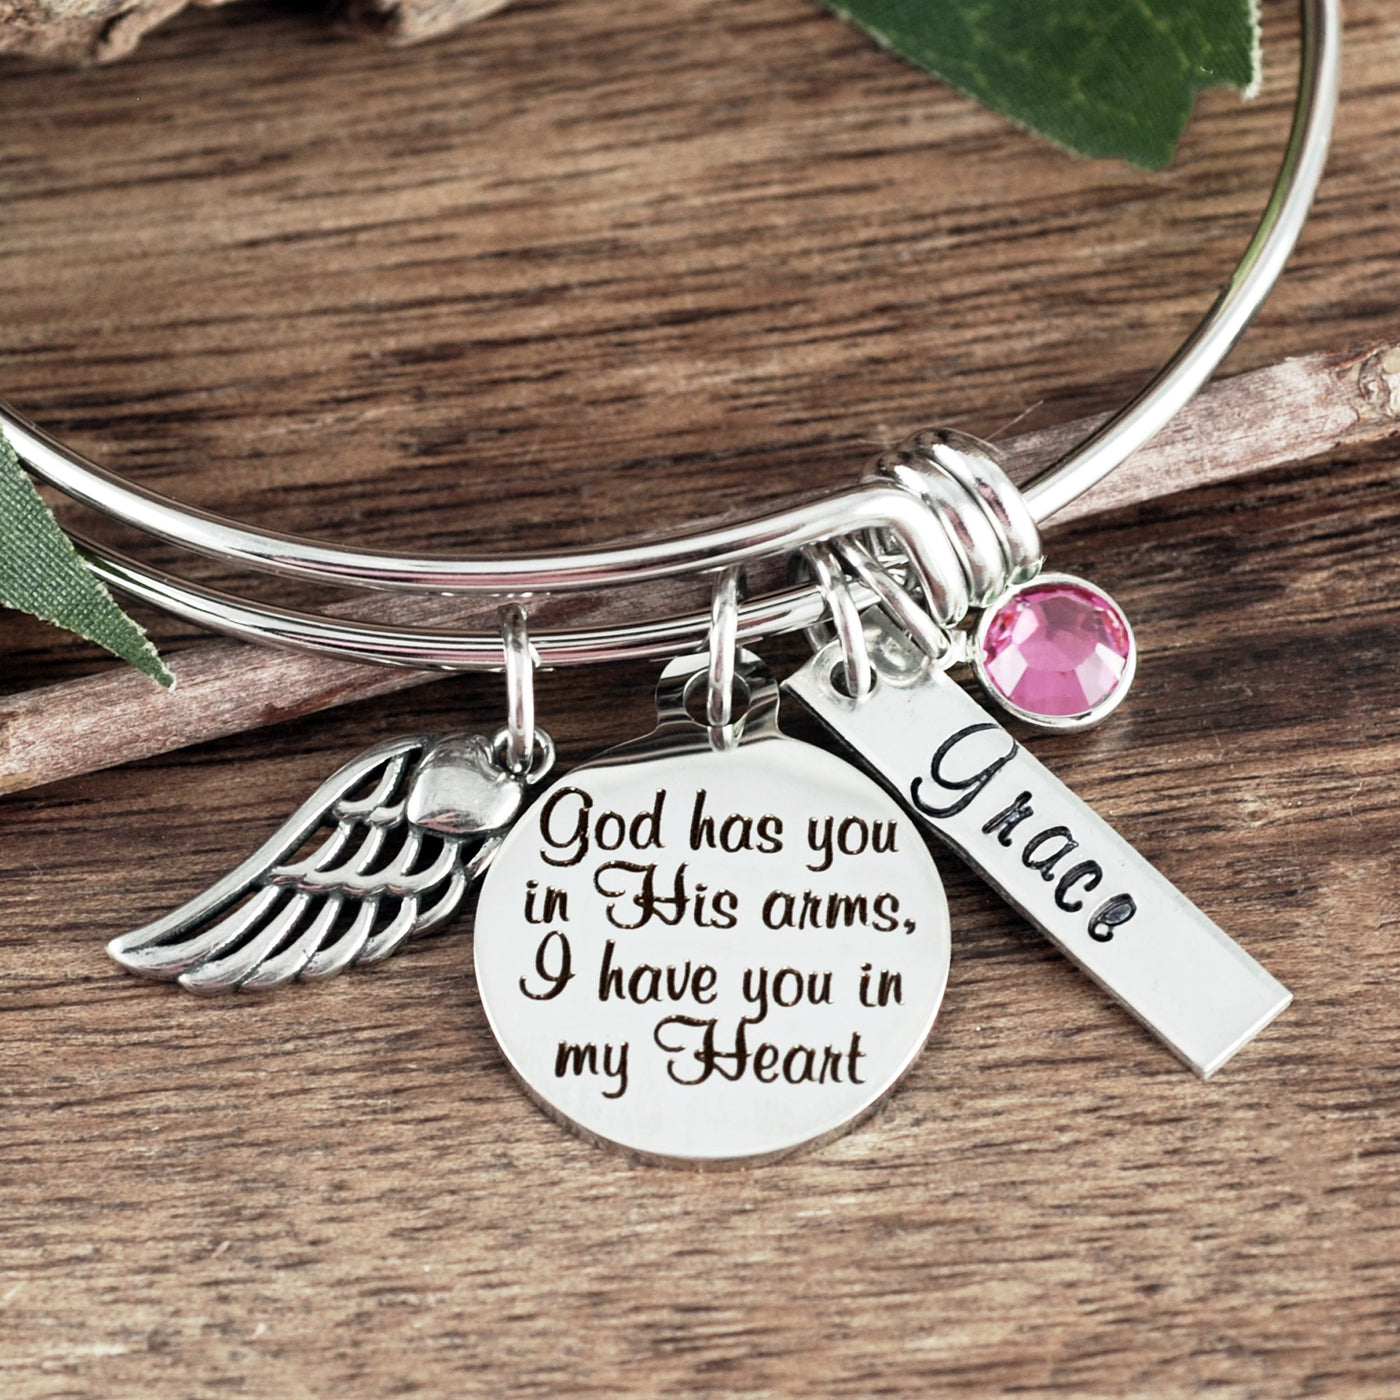 God has you in His arms I have you in my Heart Bracelet - Godfullness